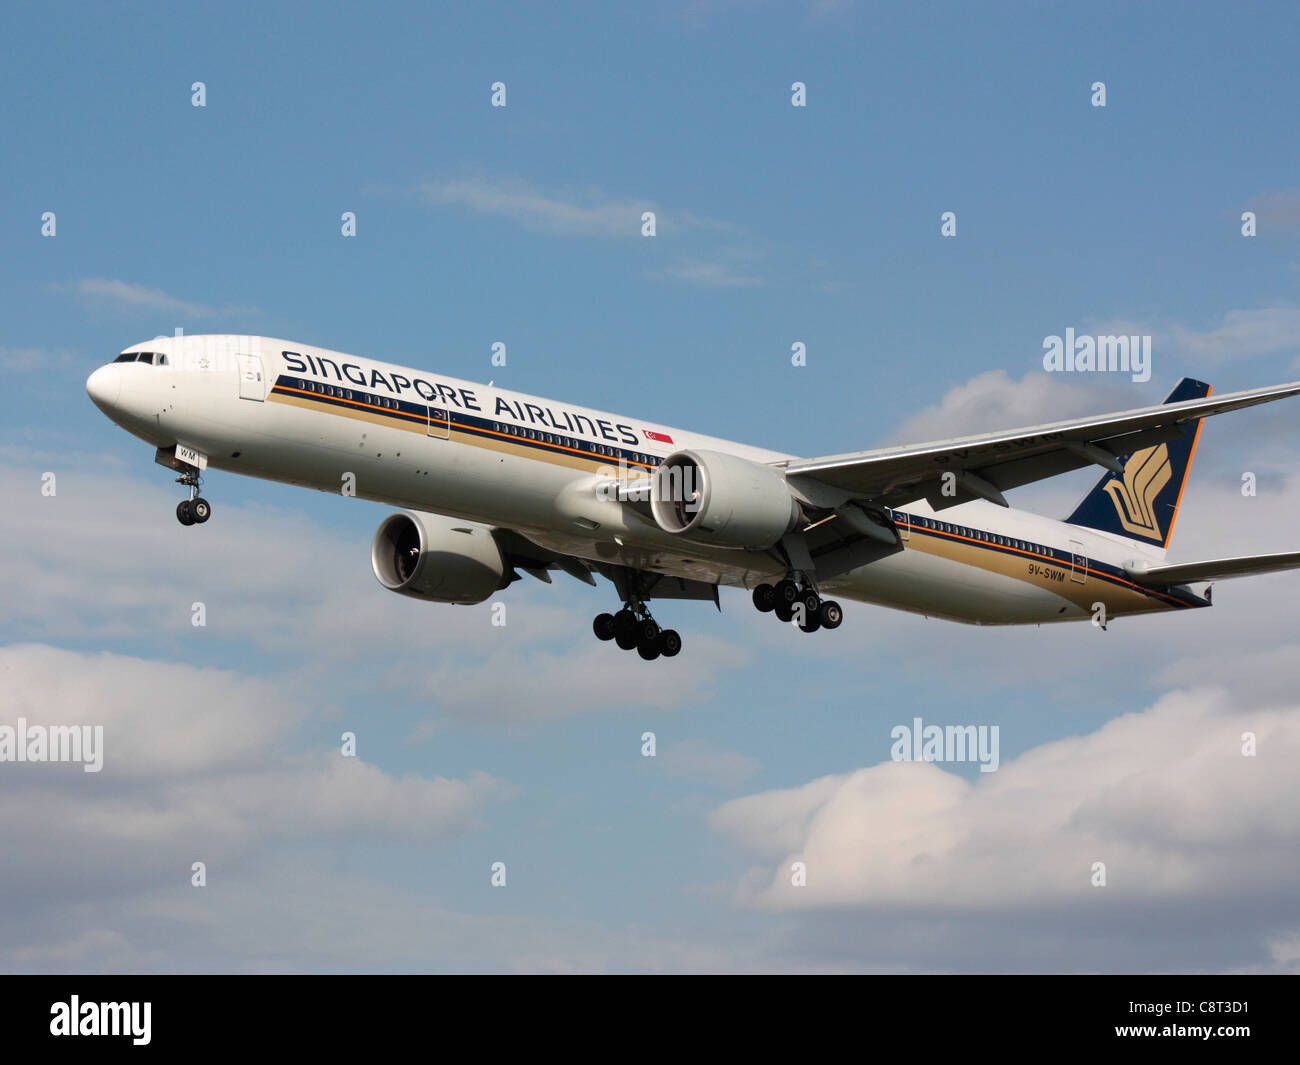 Singapore Airlines Boeing 777-300ER on approach Stock Photo